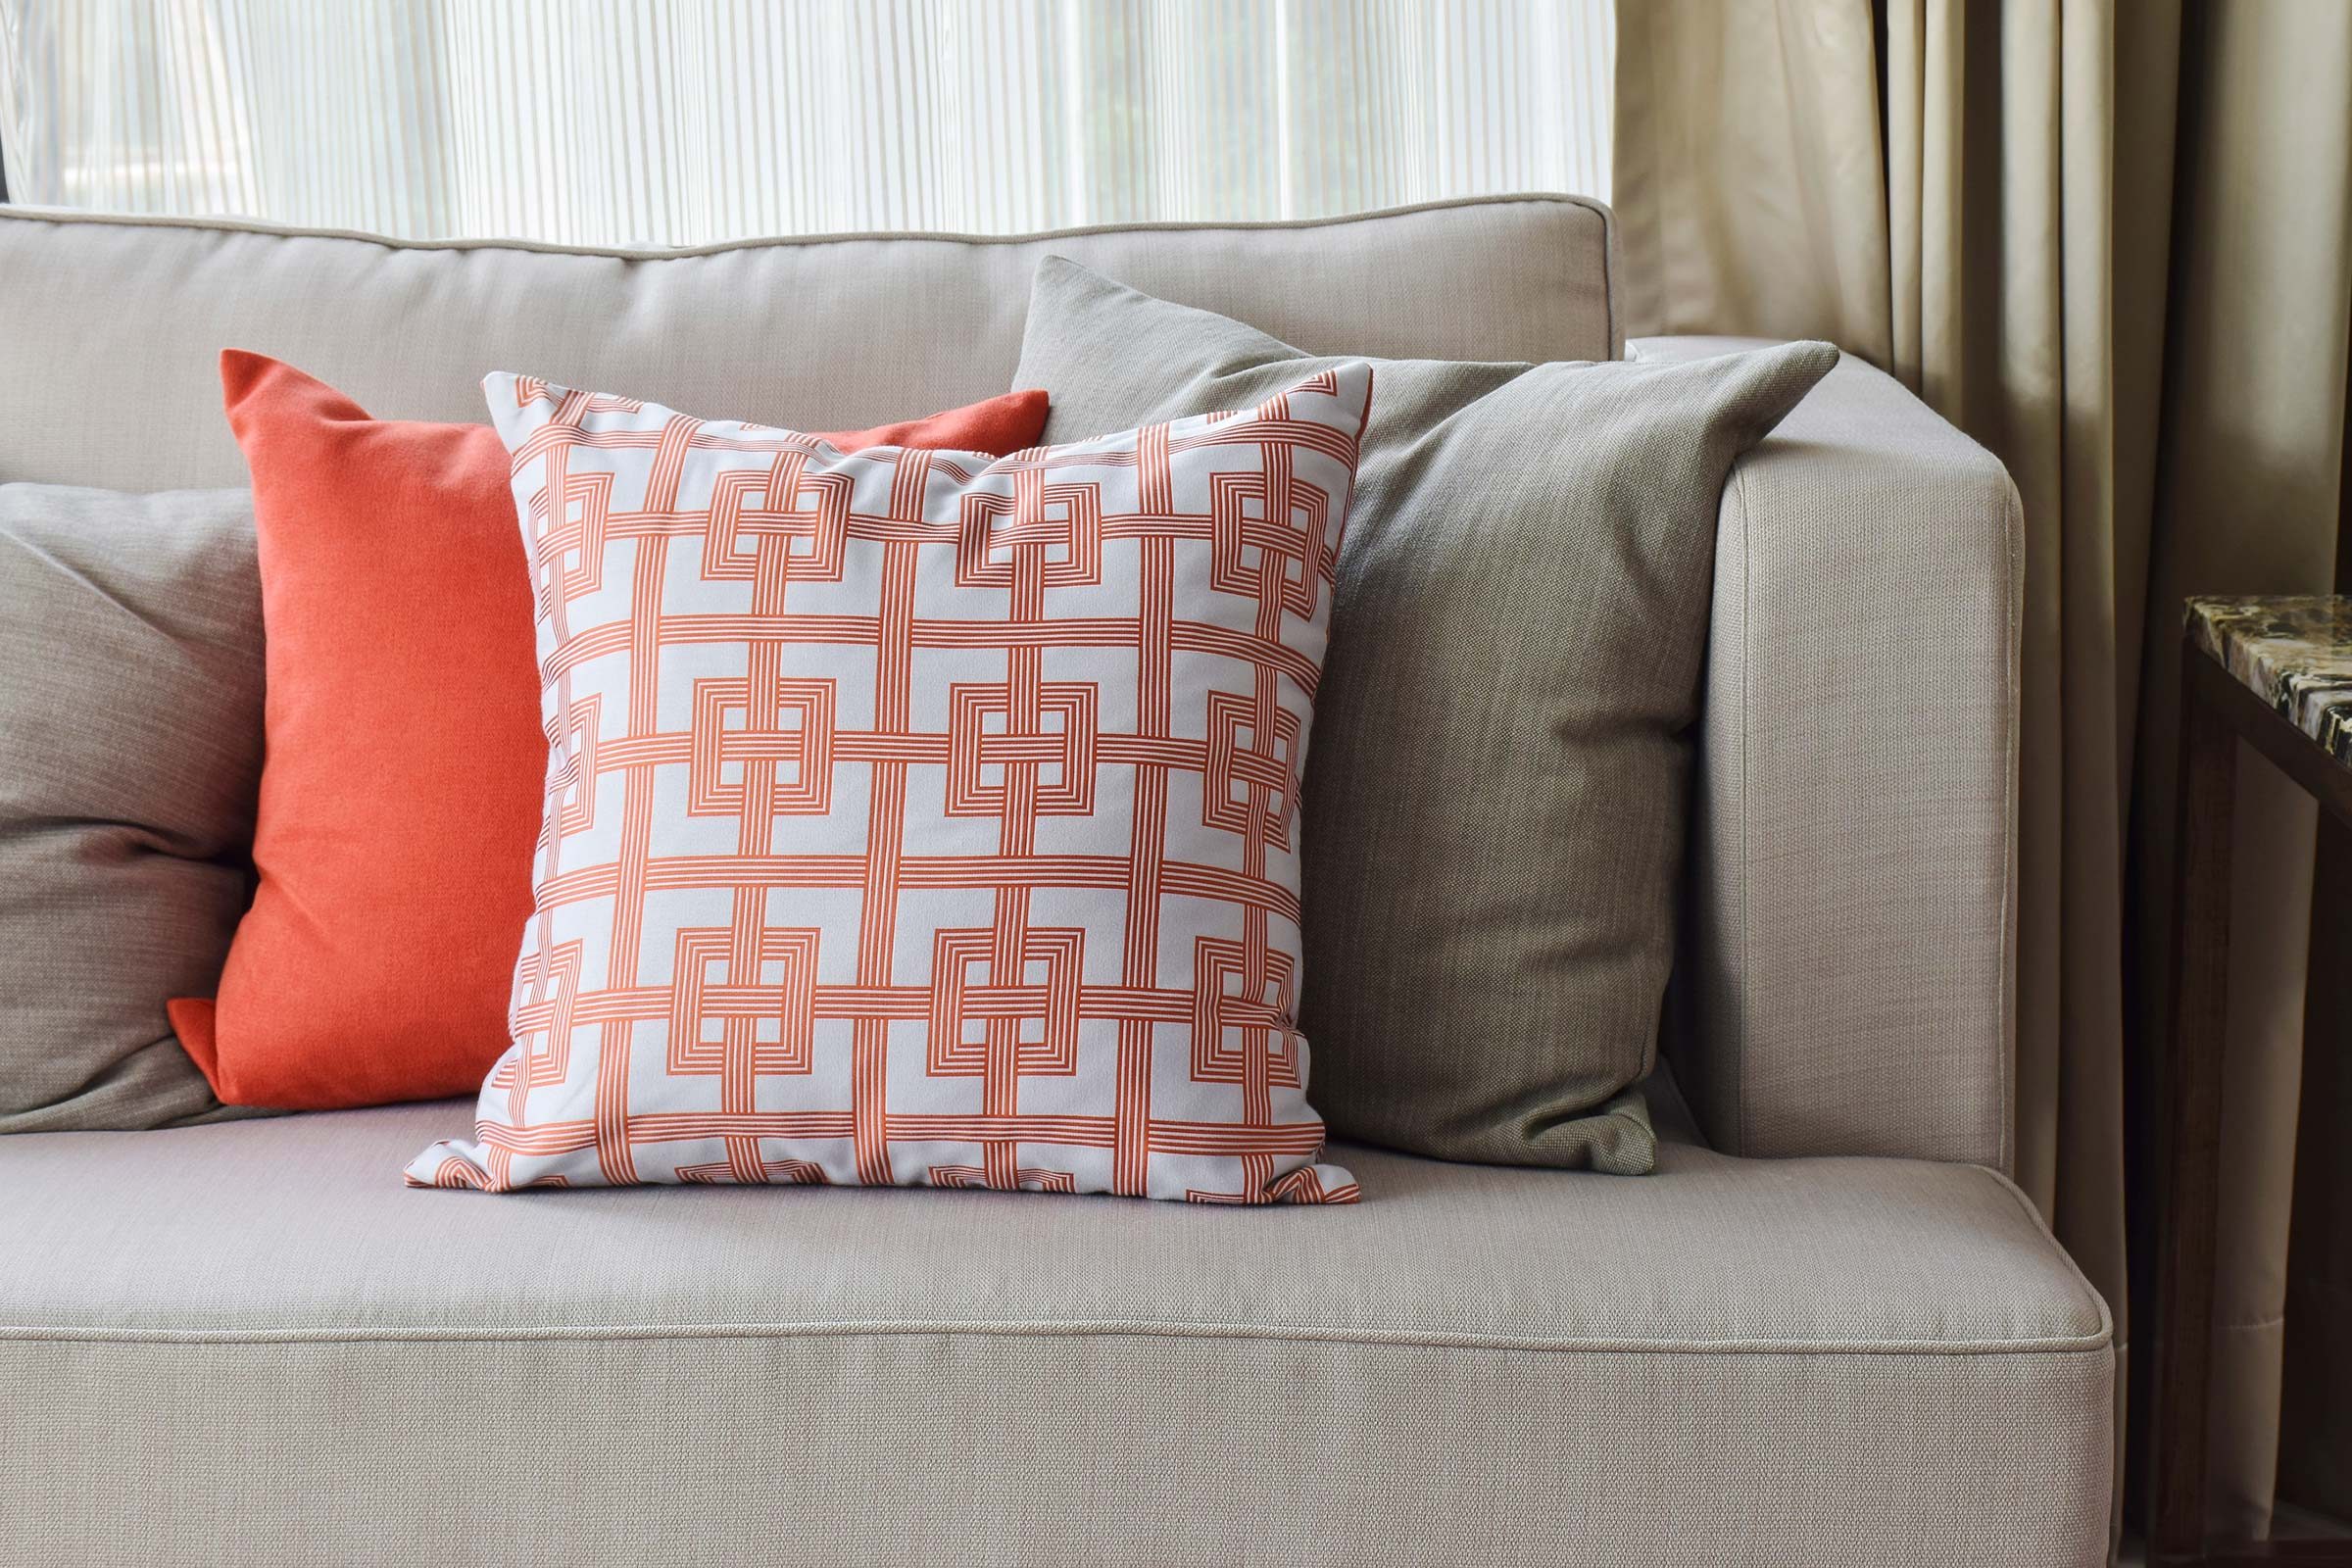 Gray couch with colorful pillows